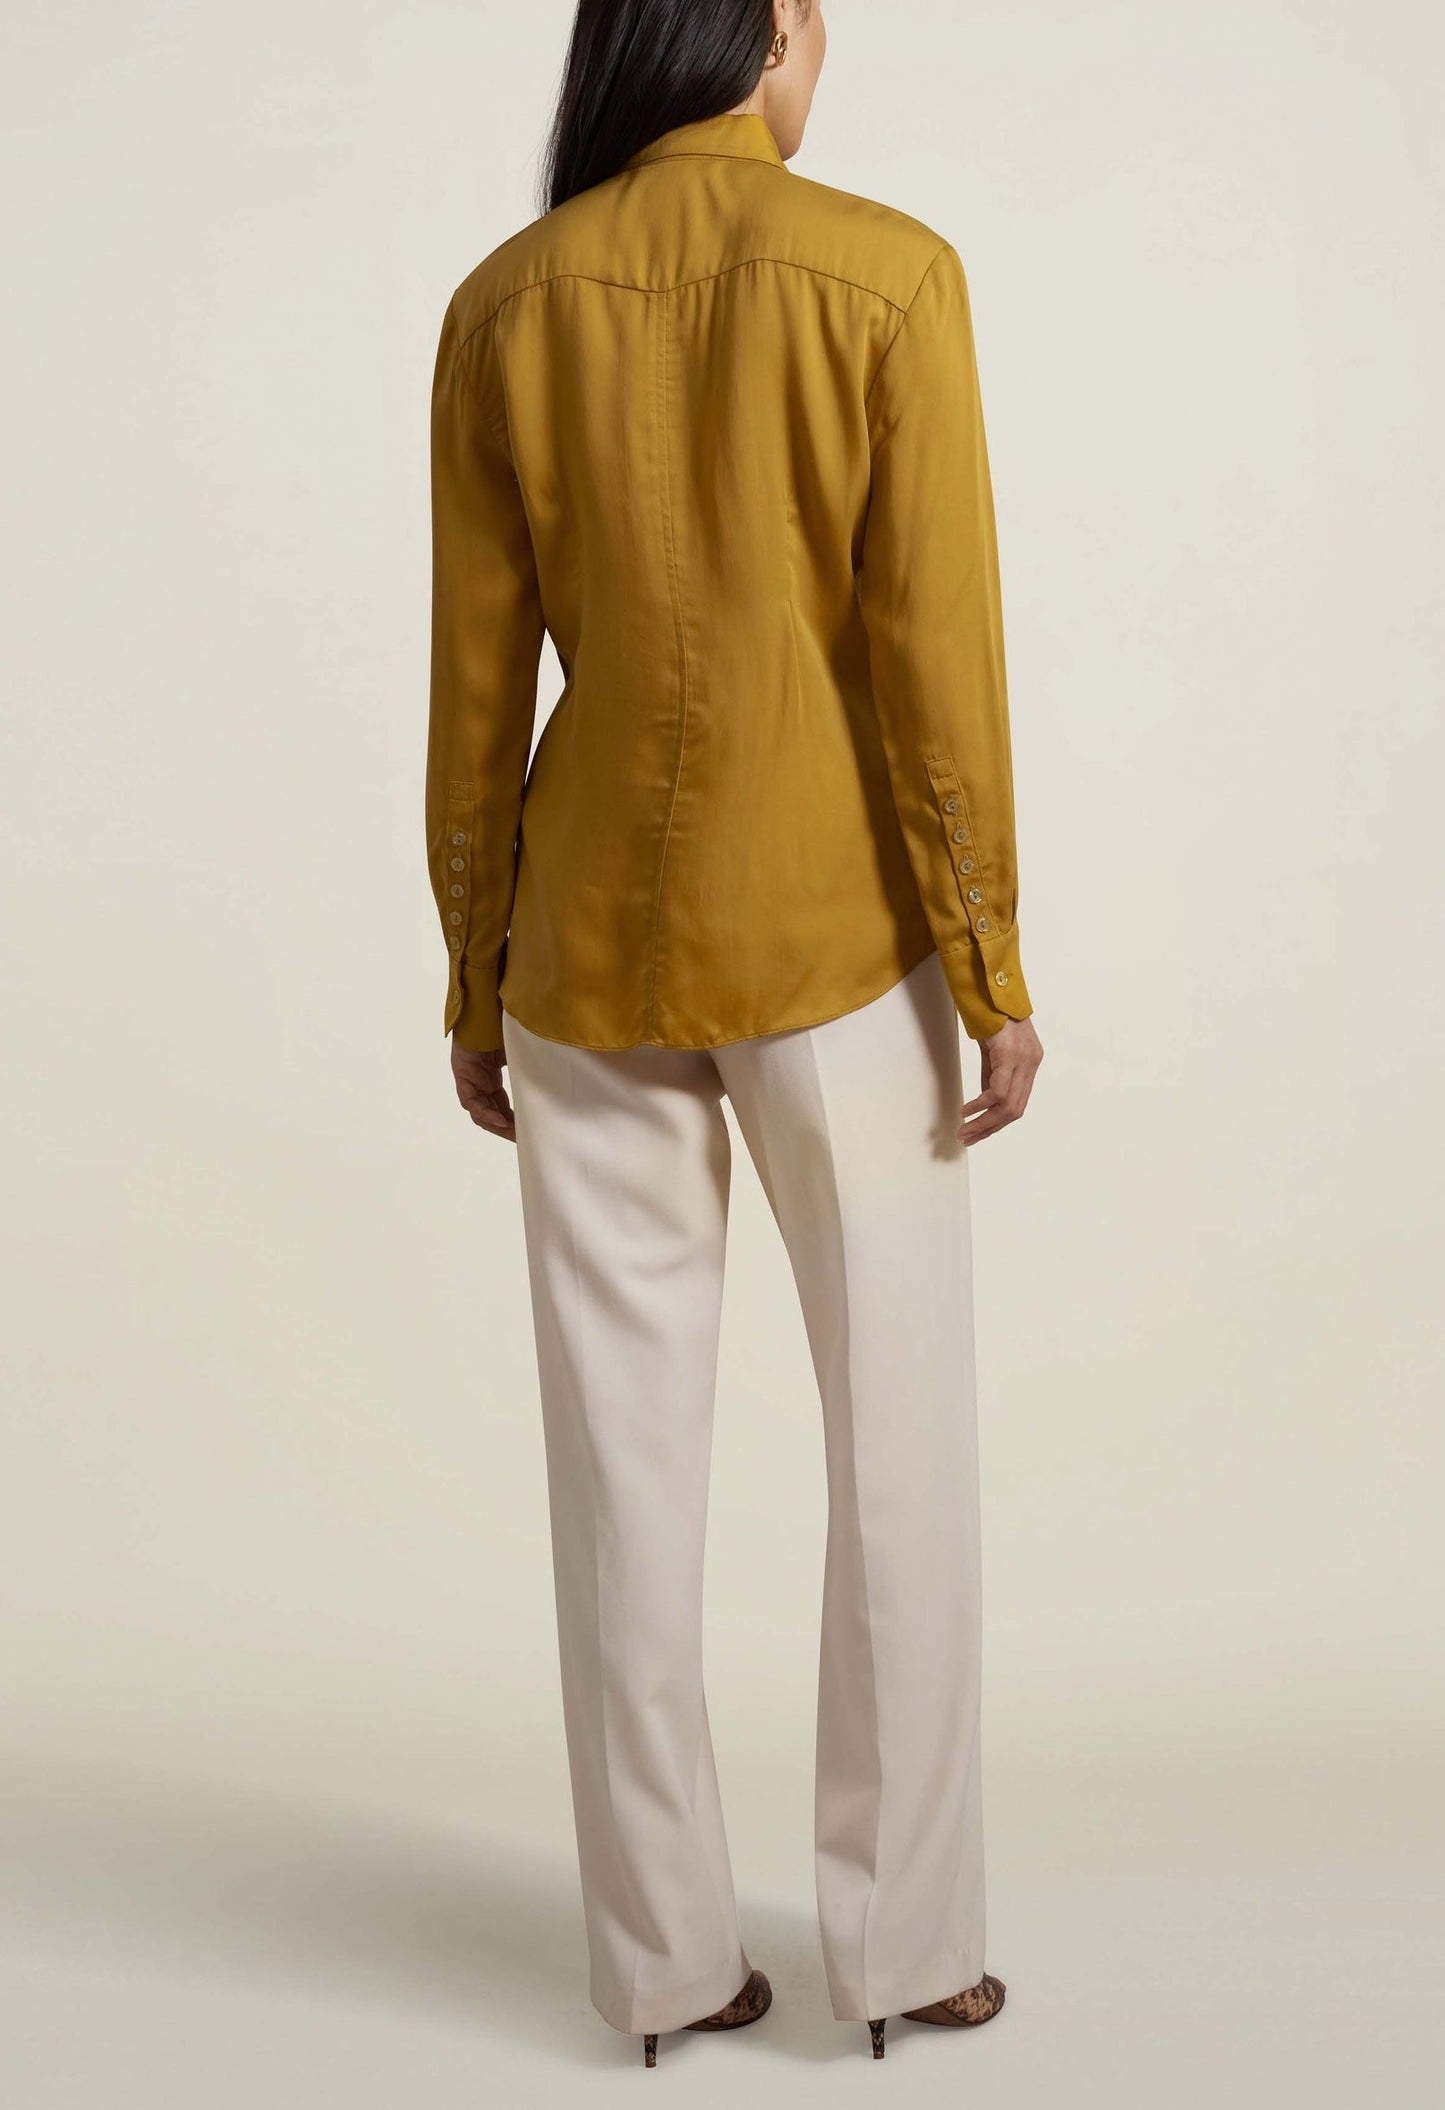 Lea Slim Blouse with Tie, Chartreuse